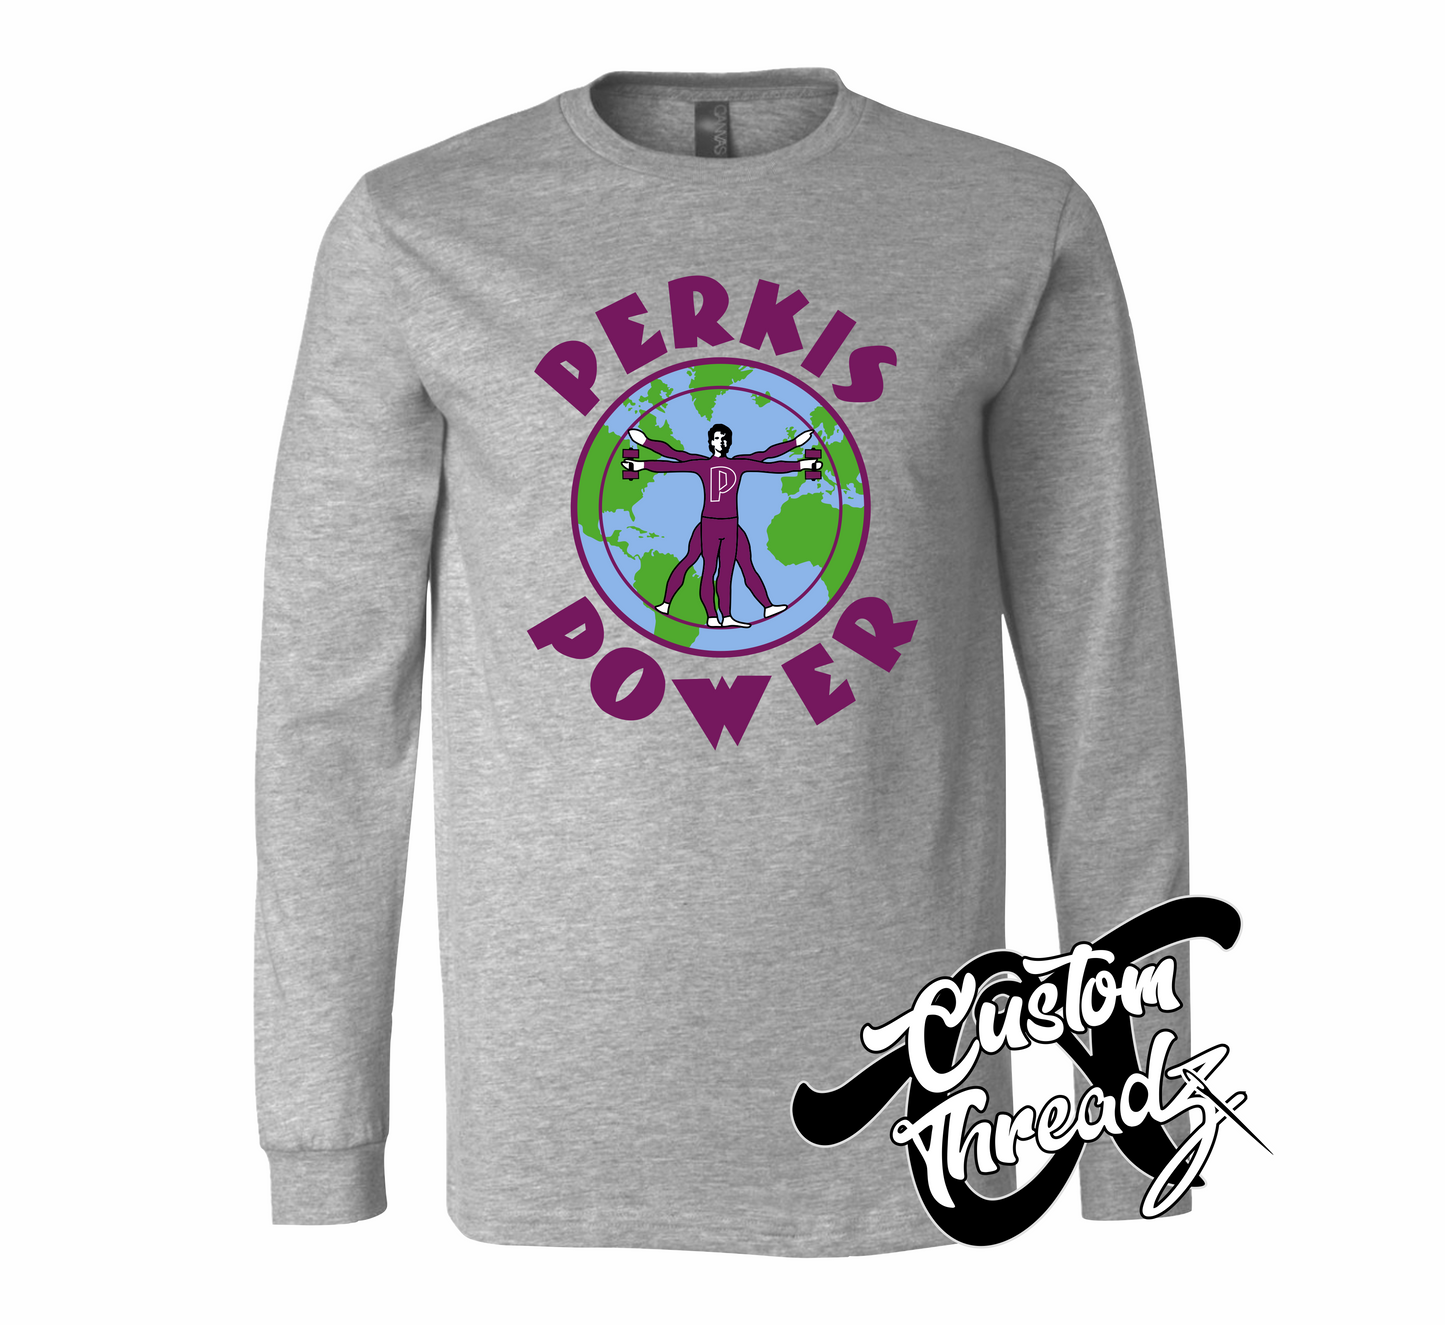 athletic heather grey long sleeve tee with perkis power heavyweights DTG printed design